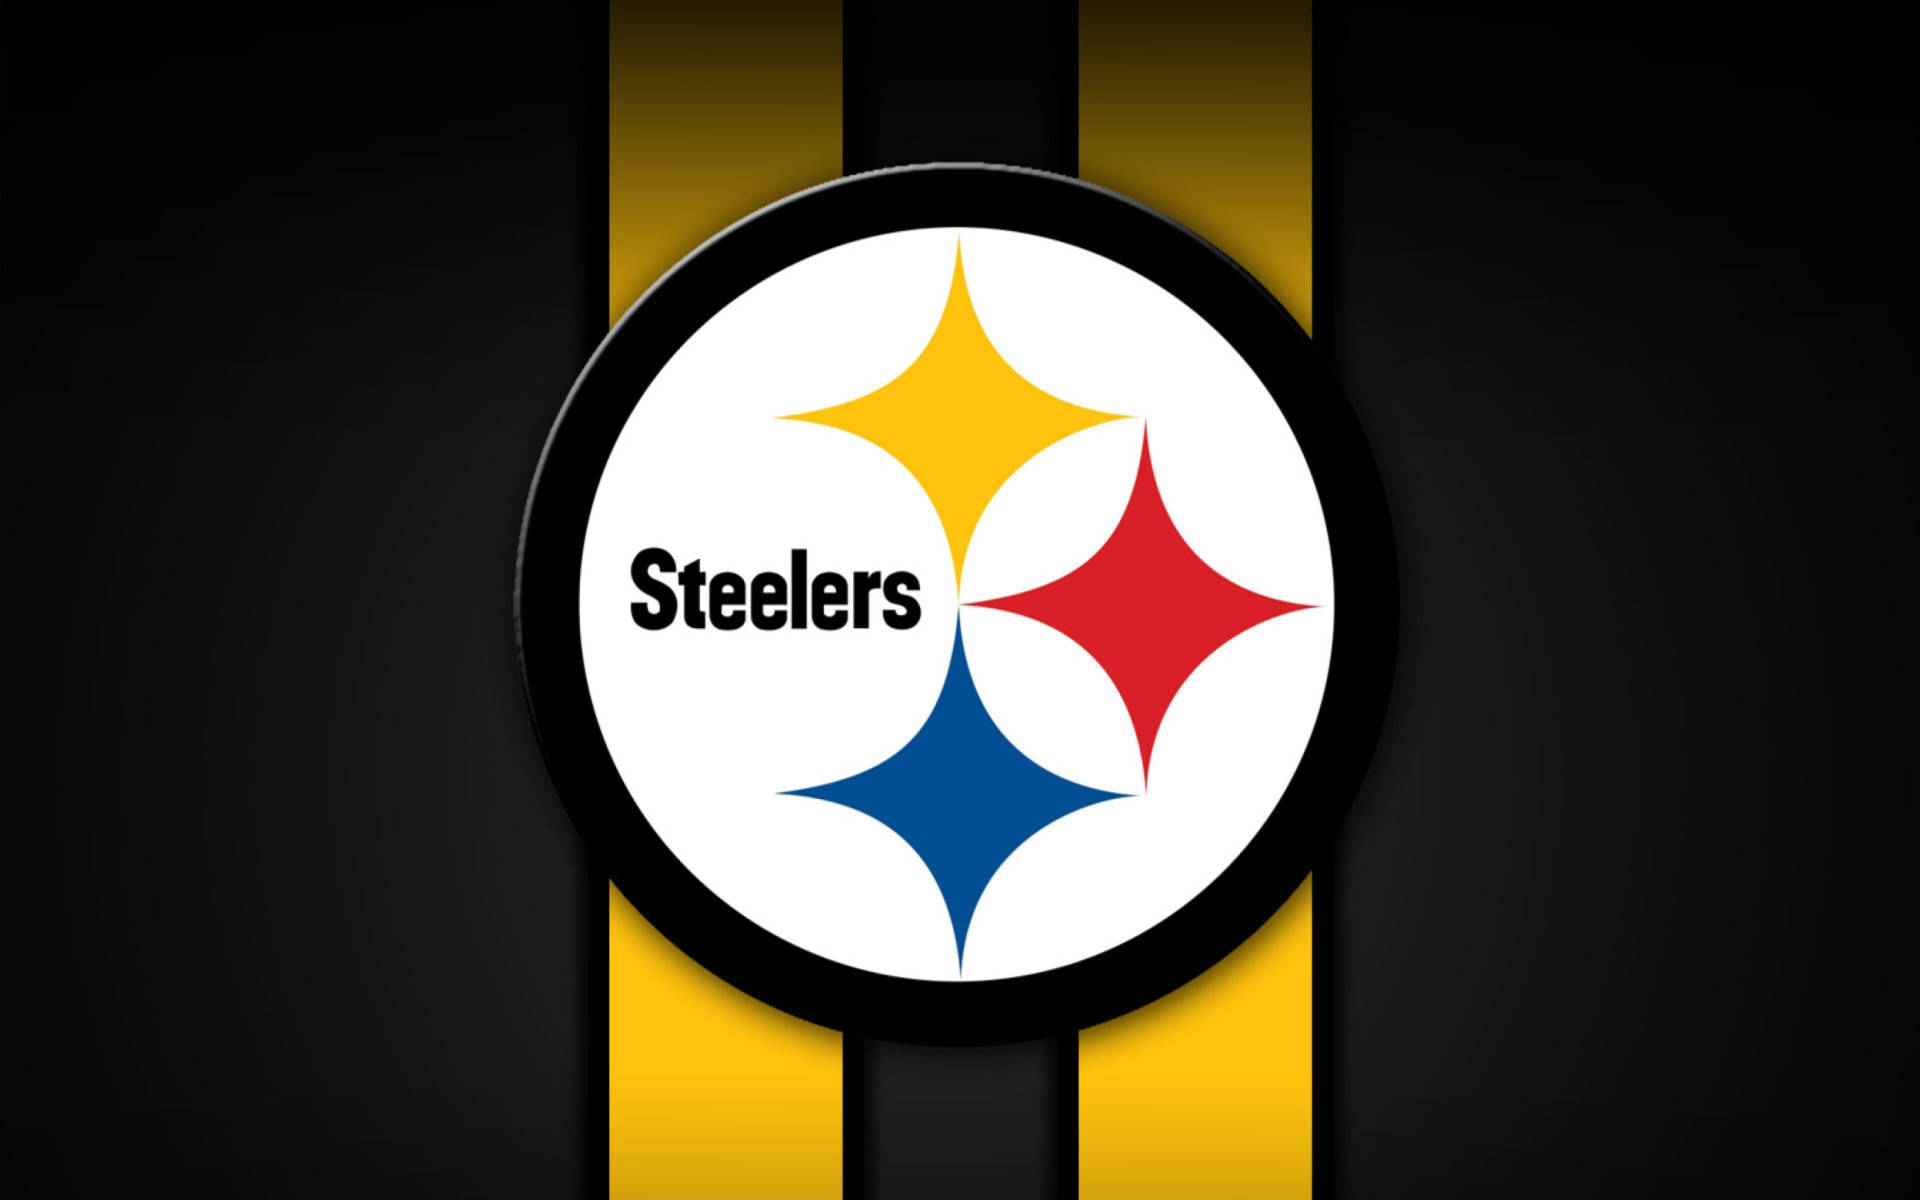 NEWS FLASH The manager of the Steelers has issued a strong